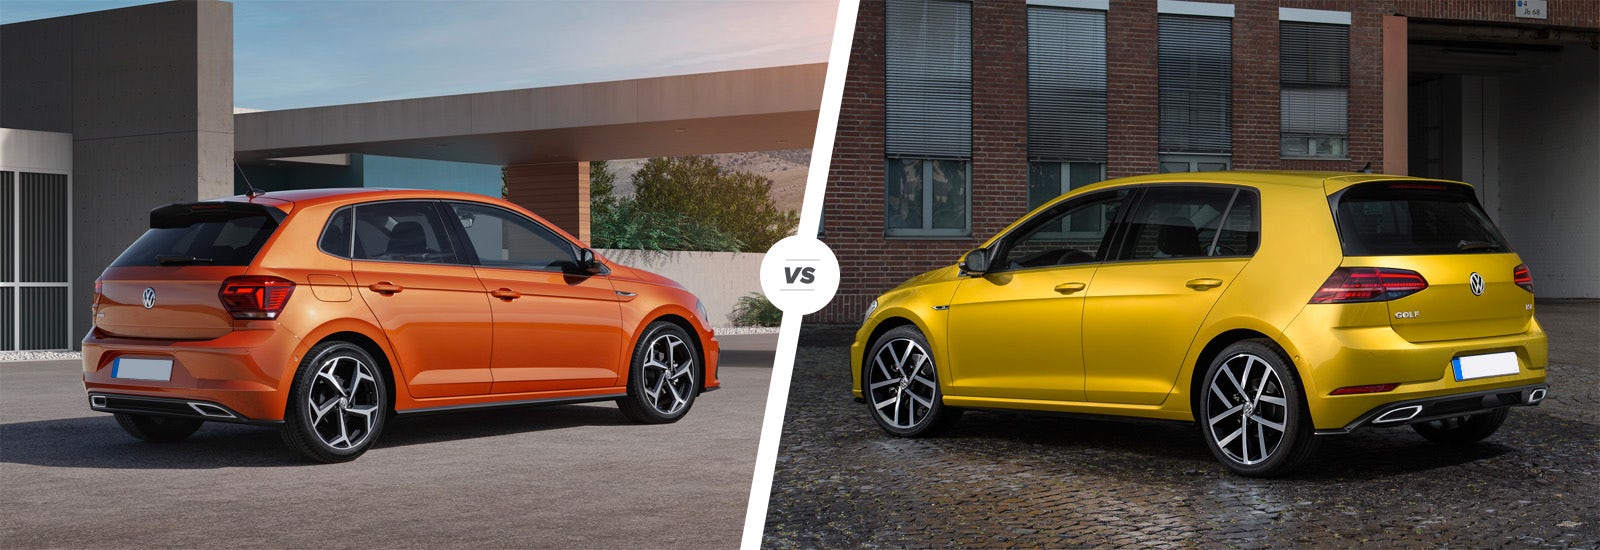 VW Polo vs Golf: which hatchback is best? | carwow